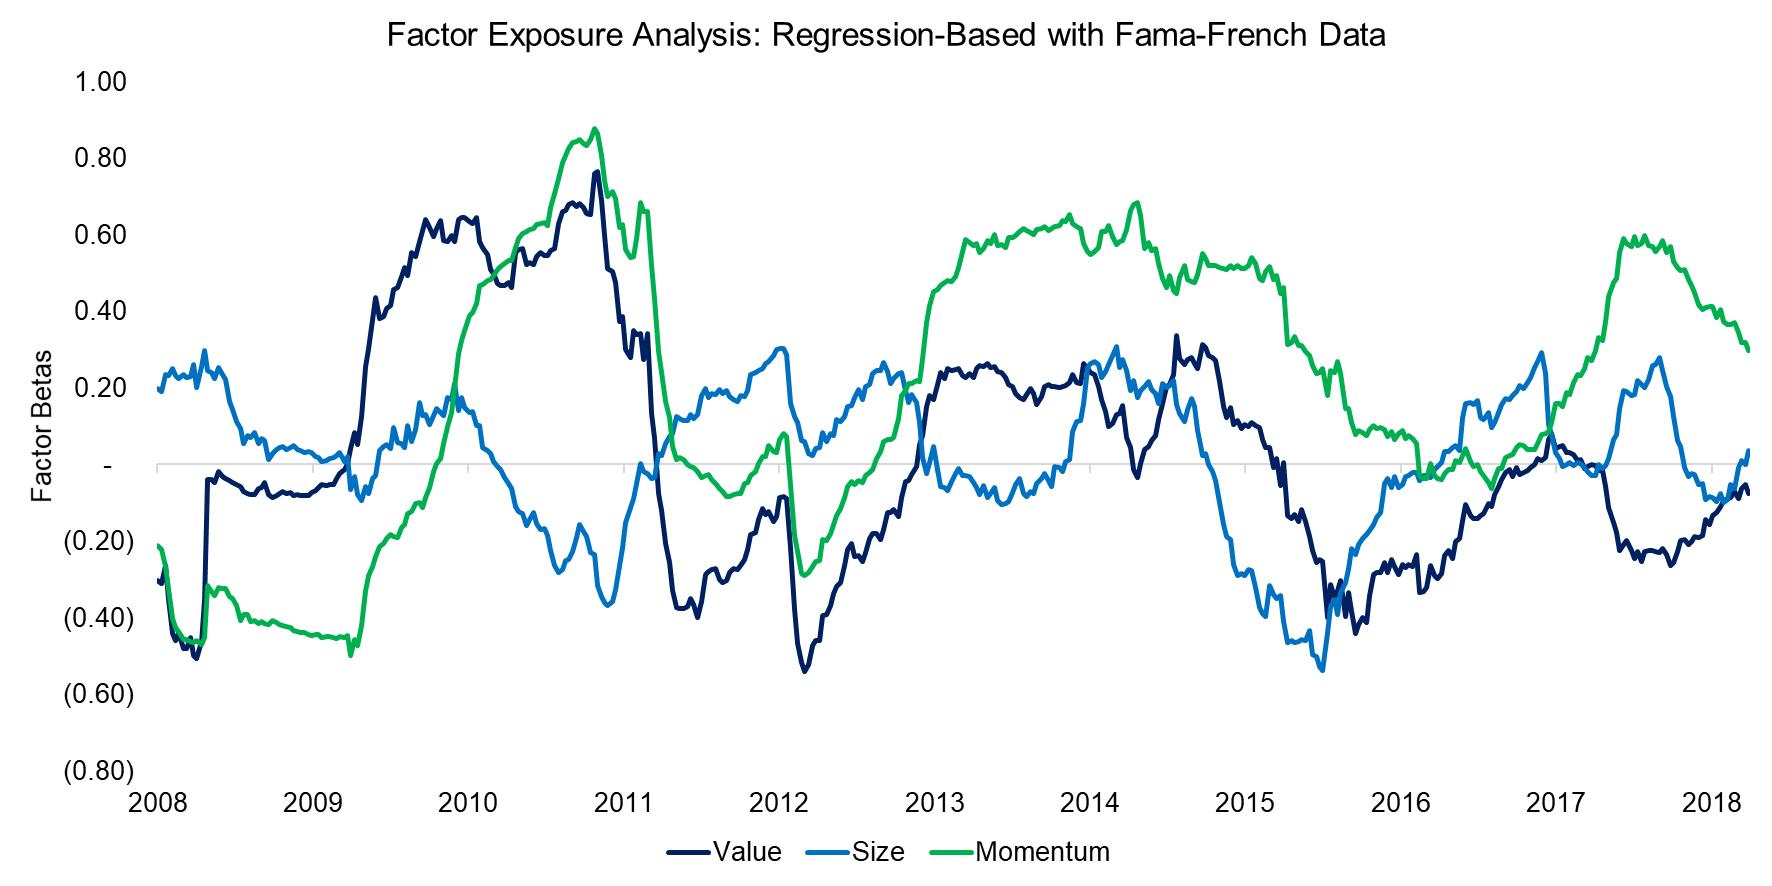 Factor Exposure Analysis Regression-Based with Fama-French Data